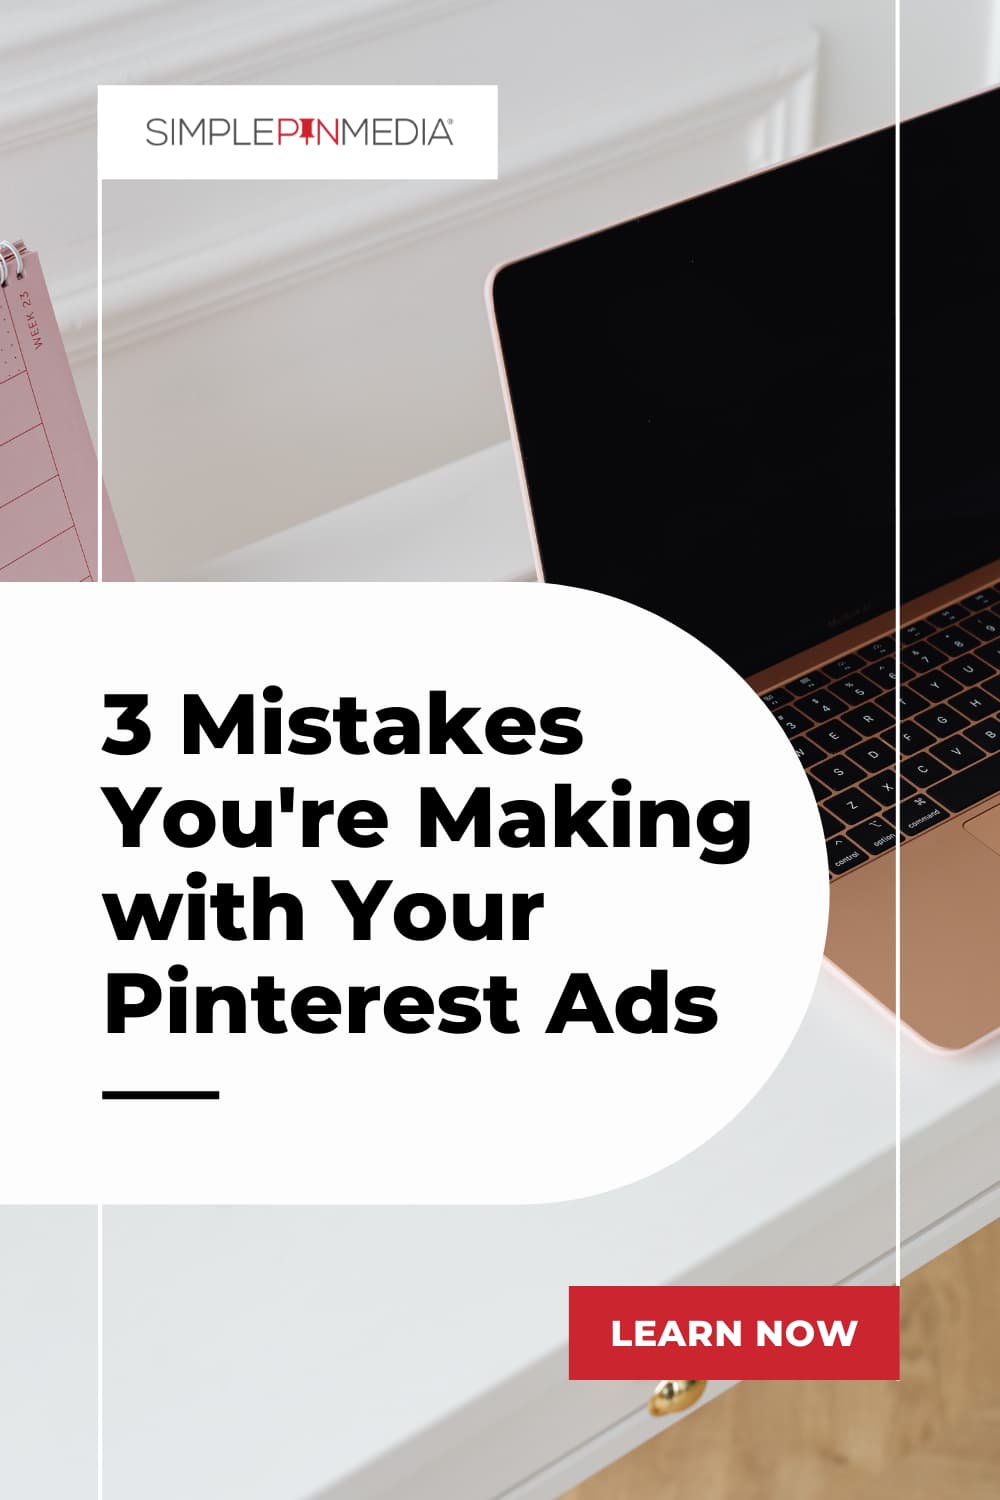 laptop on counter with text "3 mistakes you're making with your pinterest ads - learn now".